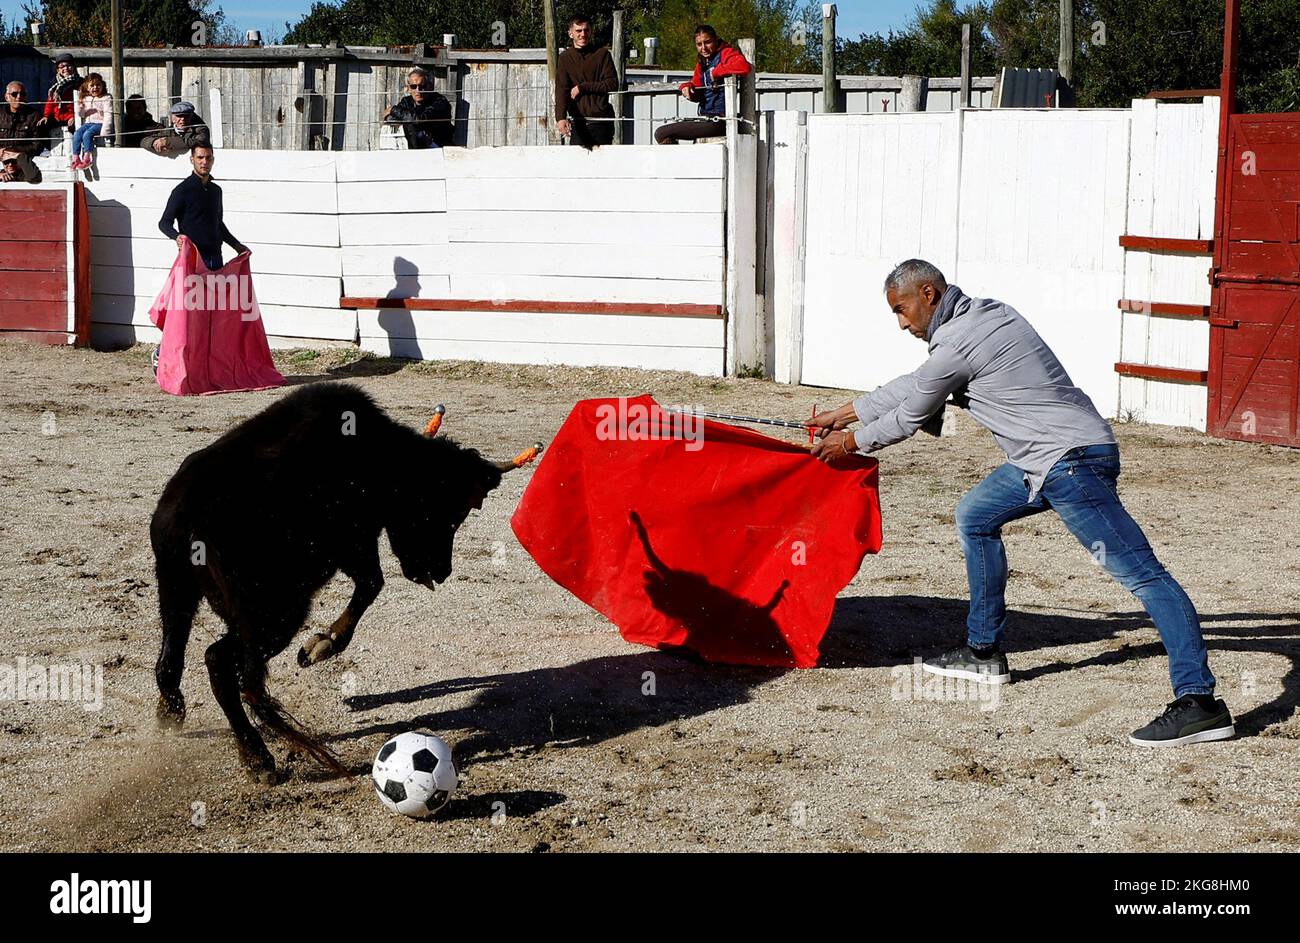 A toreador teacher of the Arles bullfighting school plays with a soccer ball during a bullfight show at the Monumental de Gimeaux arena in Arles, France, November 20, 2022.  REUTERS/Eric Gaillard     TPX IMAGES OF THE DAY Stock Photo